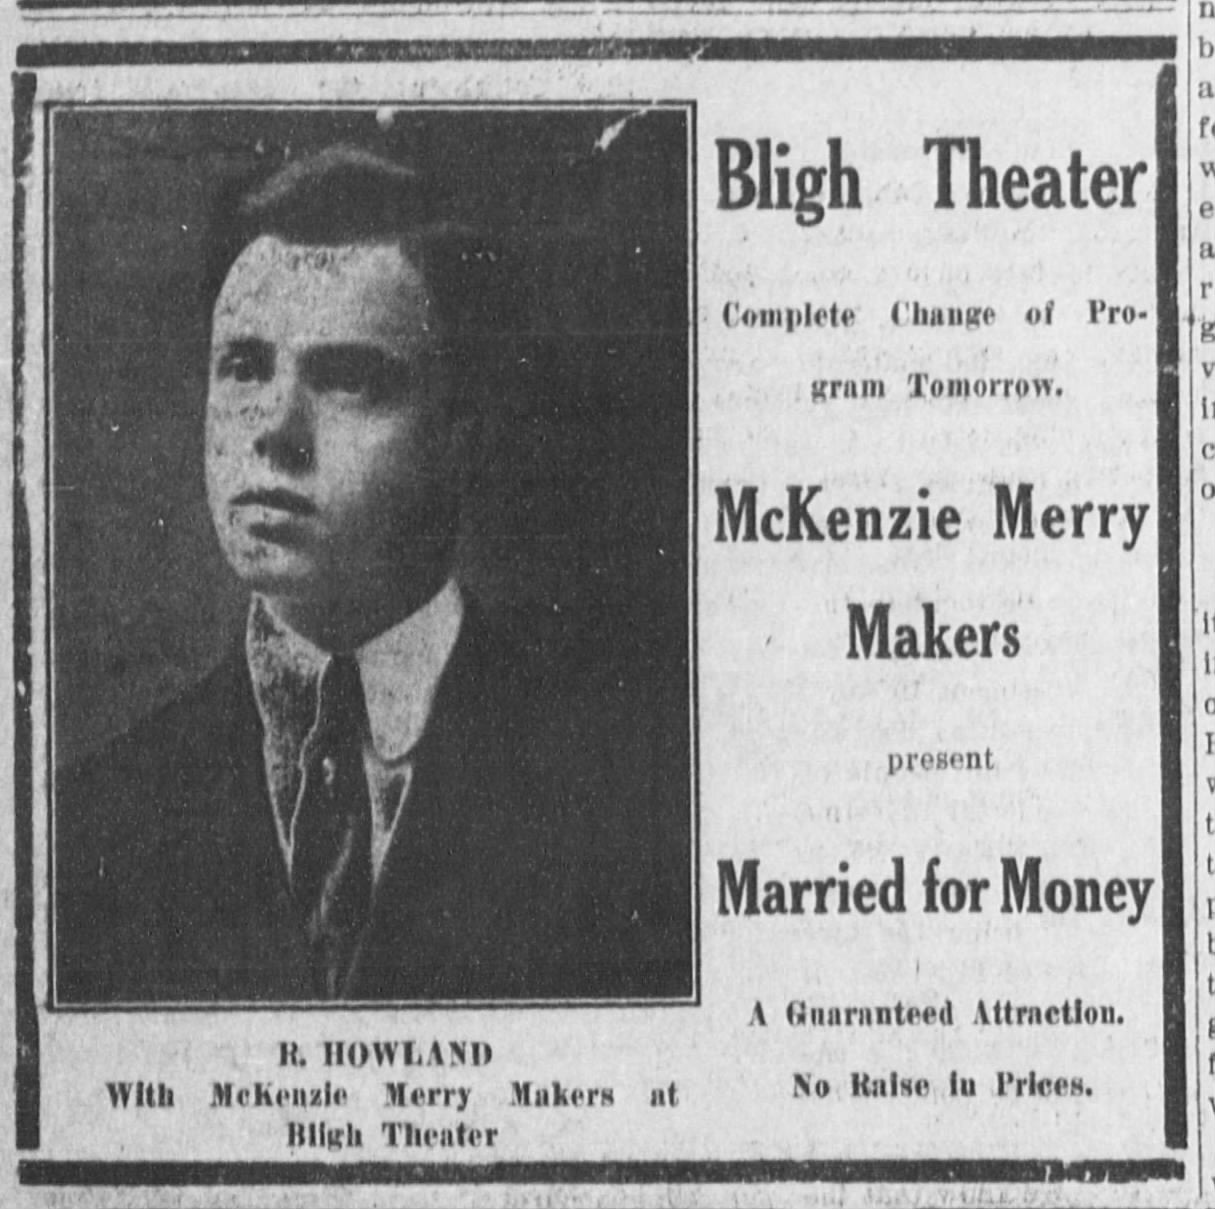 Merry Makers at the Bligh theater, 1911